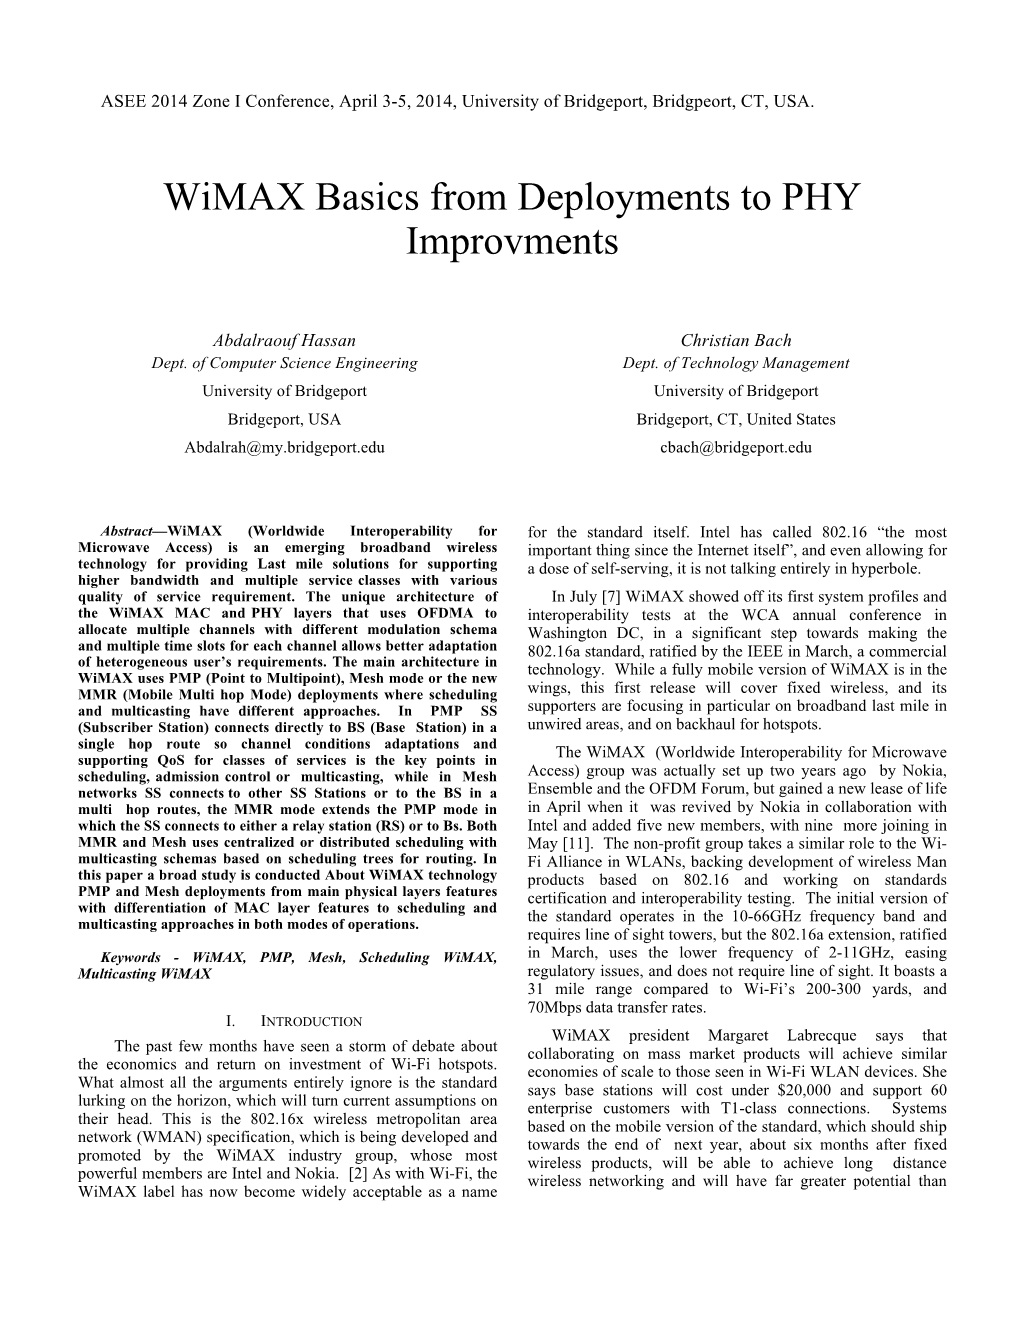 Wimax Basics from Deployments to PHY Improvments